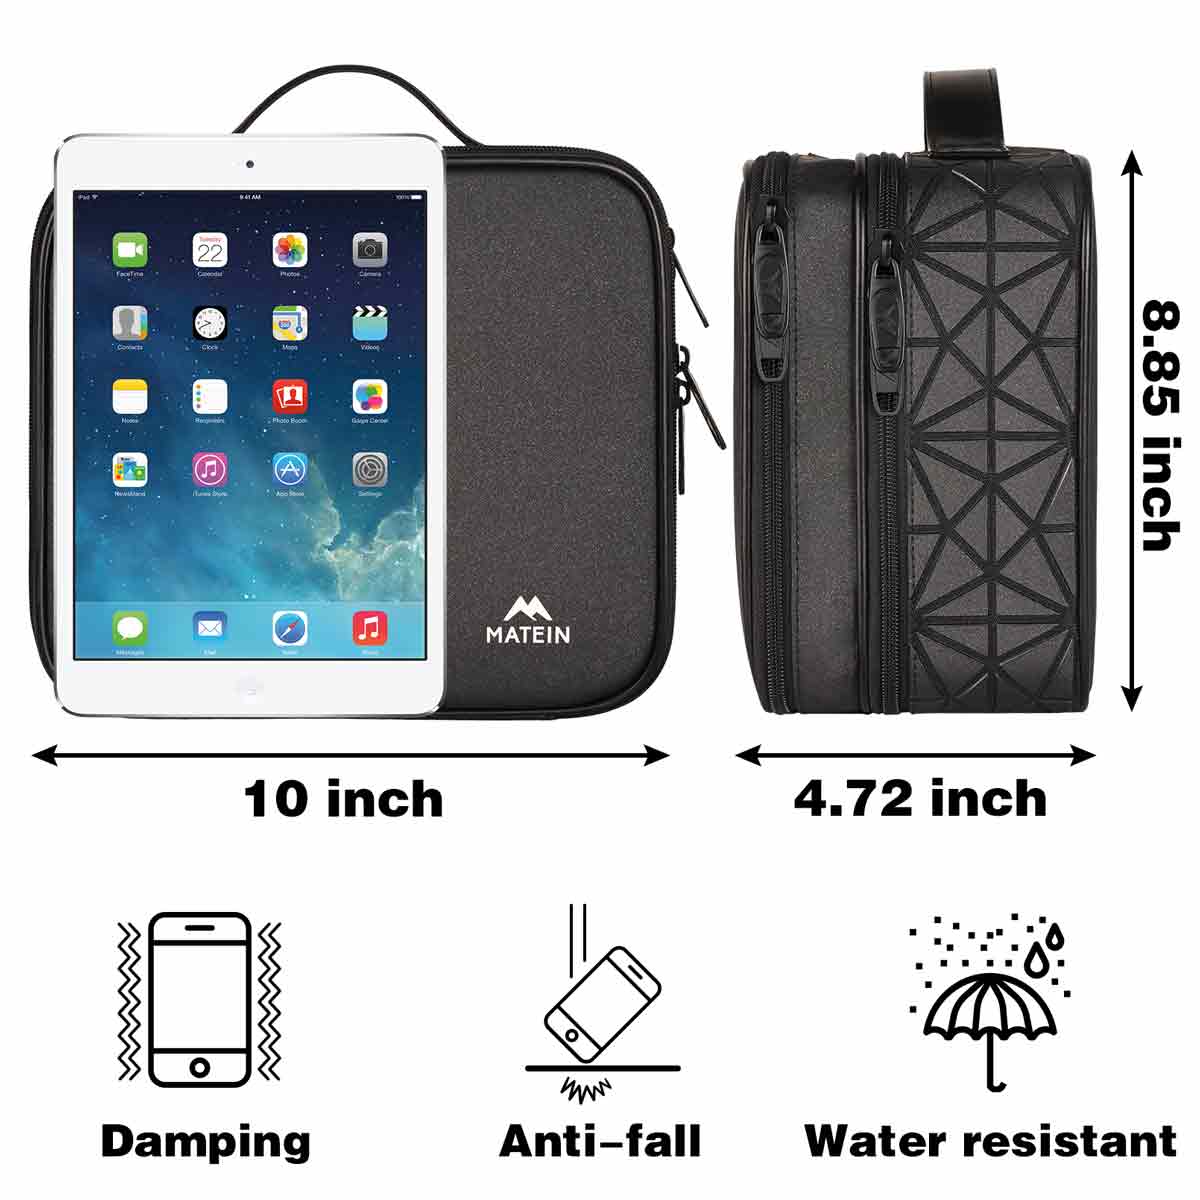  MATEIN Electronics Travel Organizer, Water Resistant Electronic  Accessories Case. Cat6 Ethernet Cable 100ft, Long Flat Internet Cable for  Gaming, High Speed Network Cord with Clips RJ45 Snagless Conne : Electronics